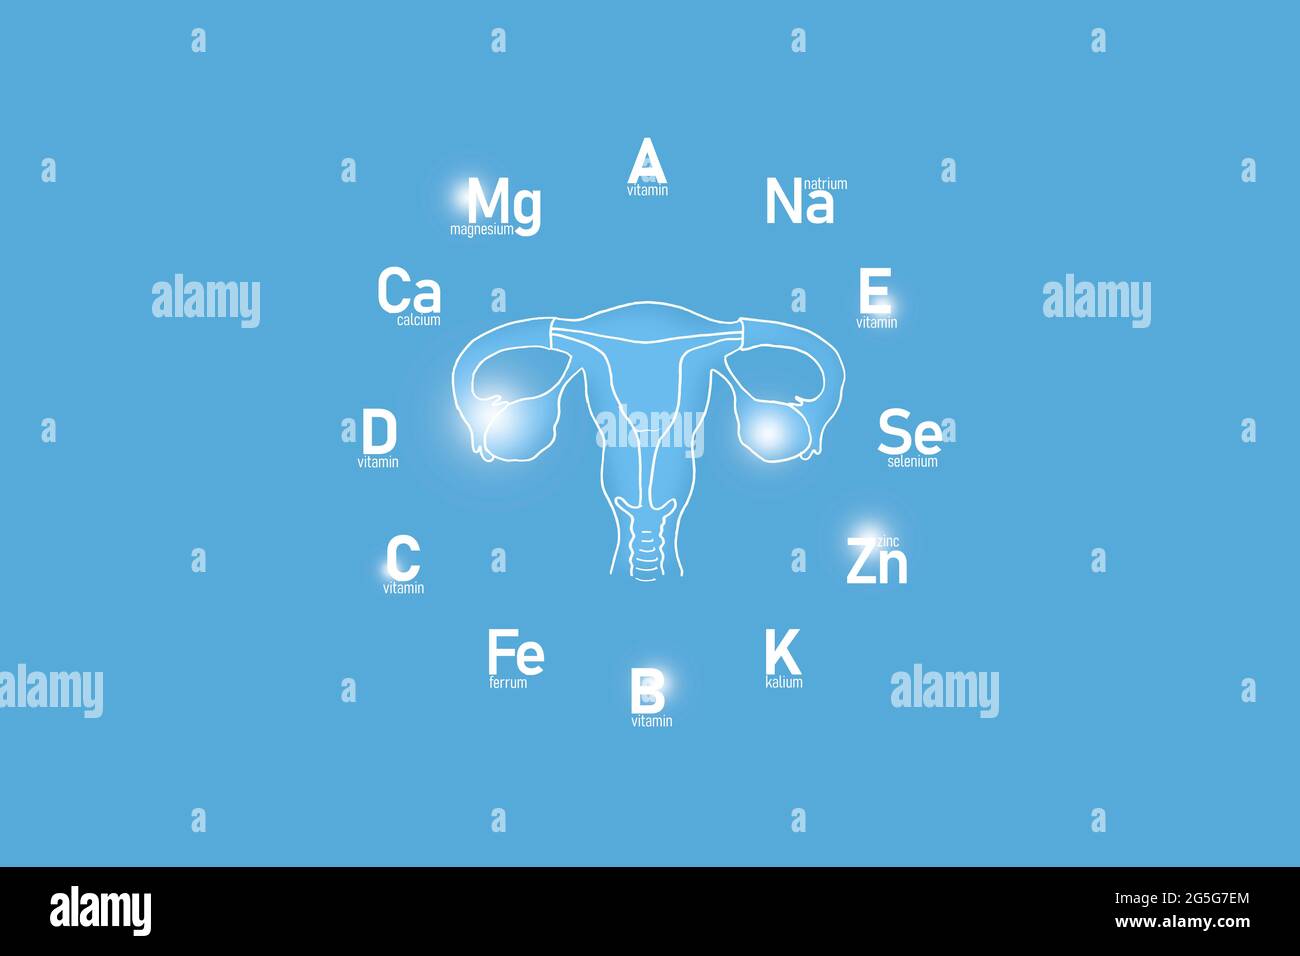 Stylized clockface with essential vitamins and microelements for human health, hand drawn Uterus, light blue background. Stock Photo